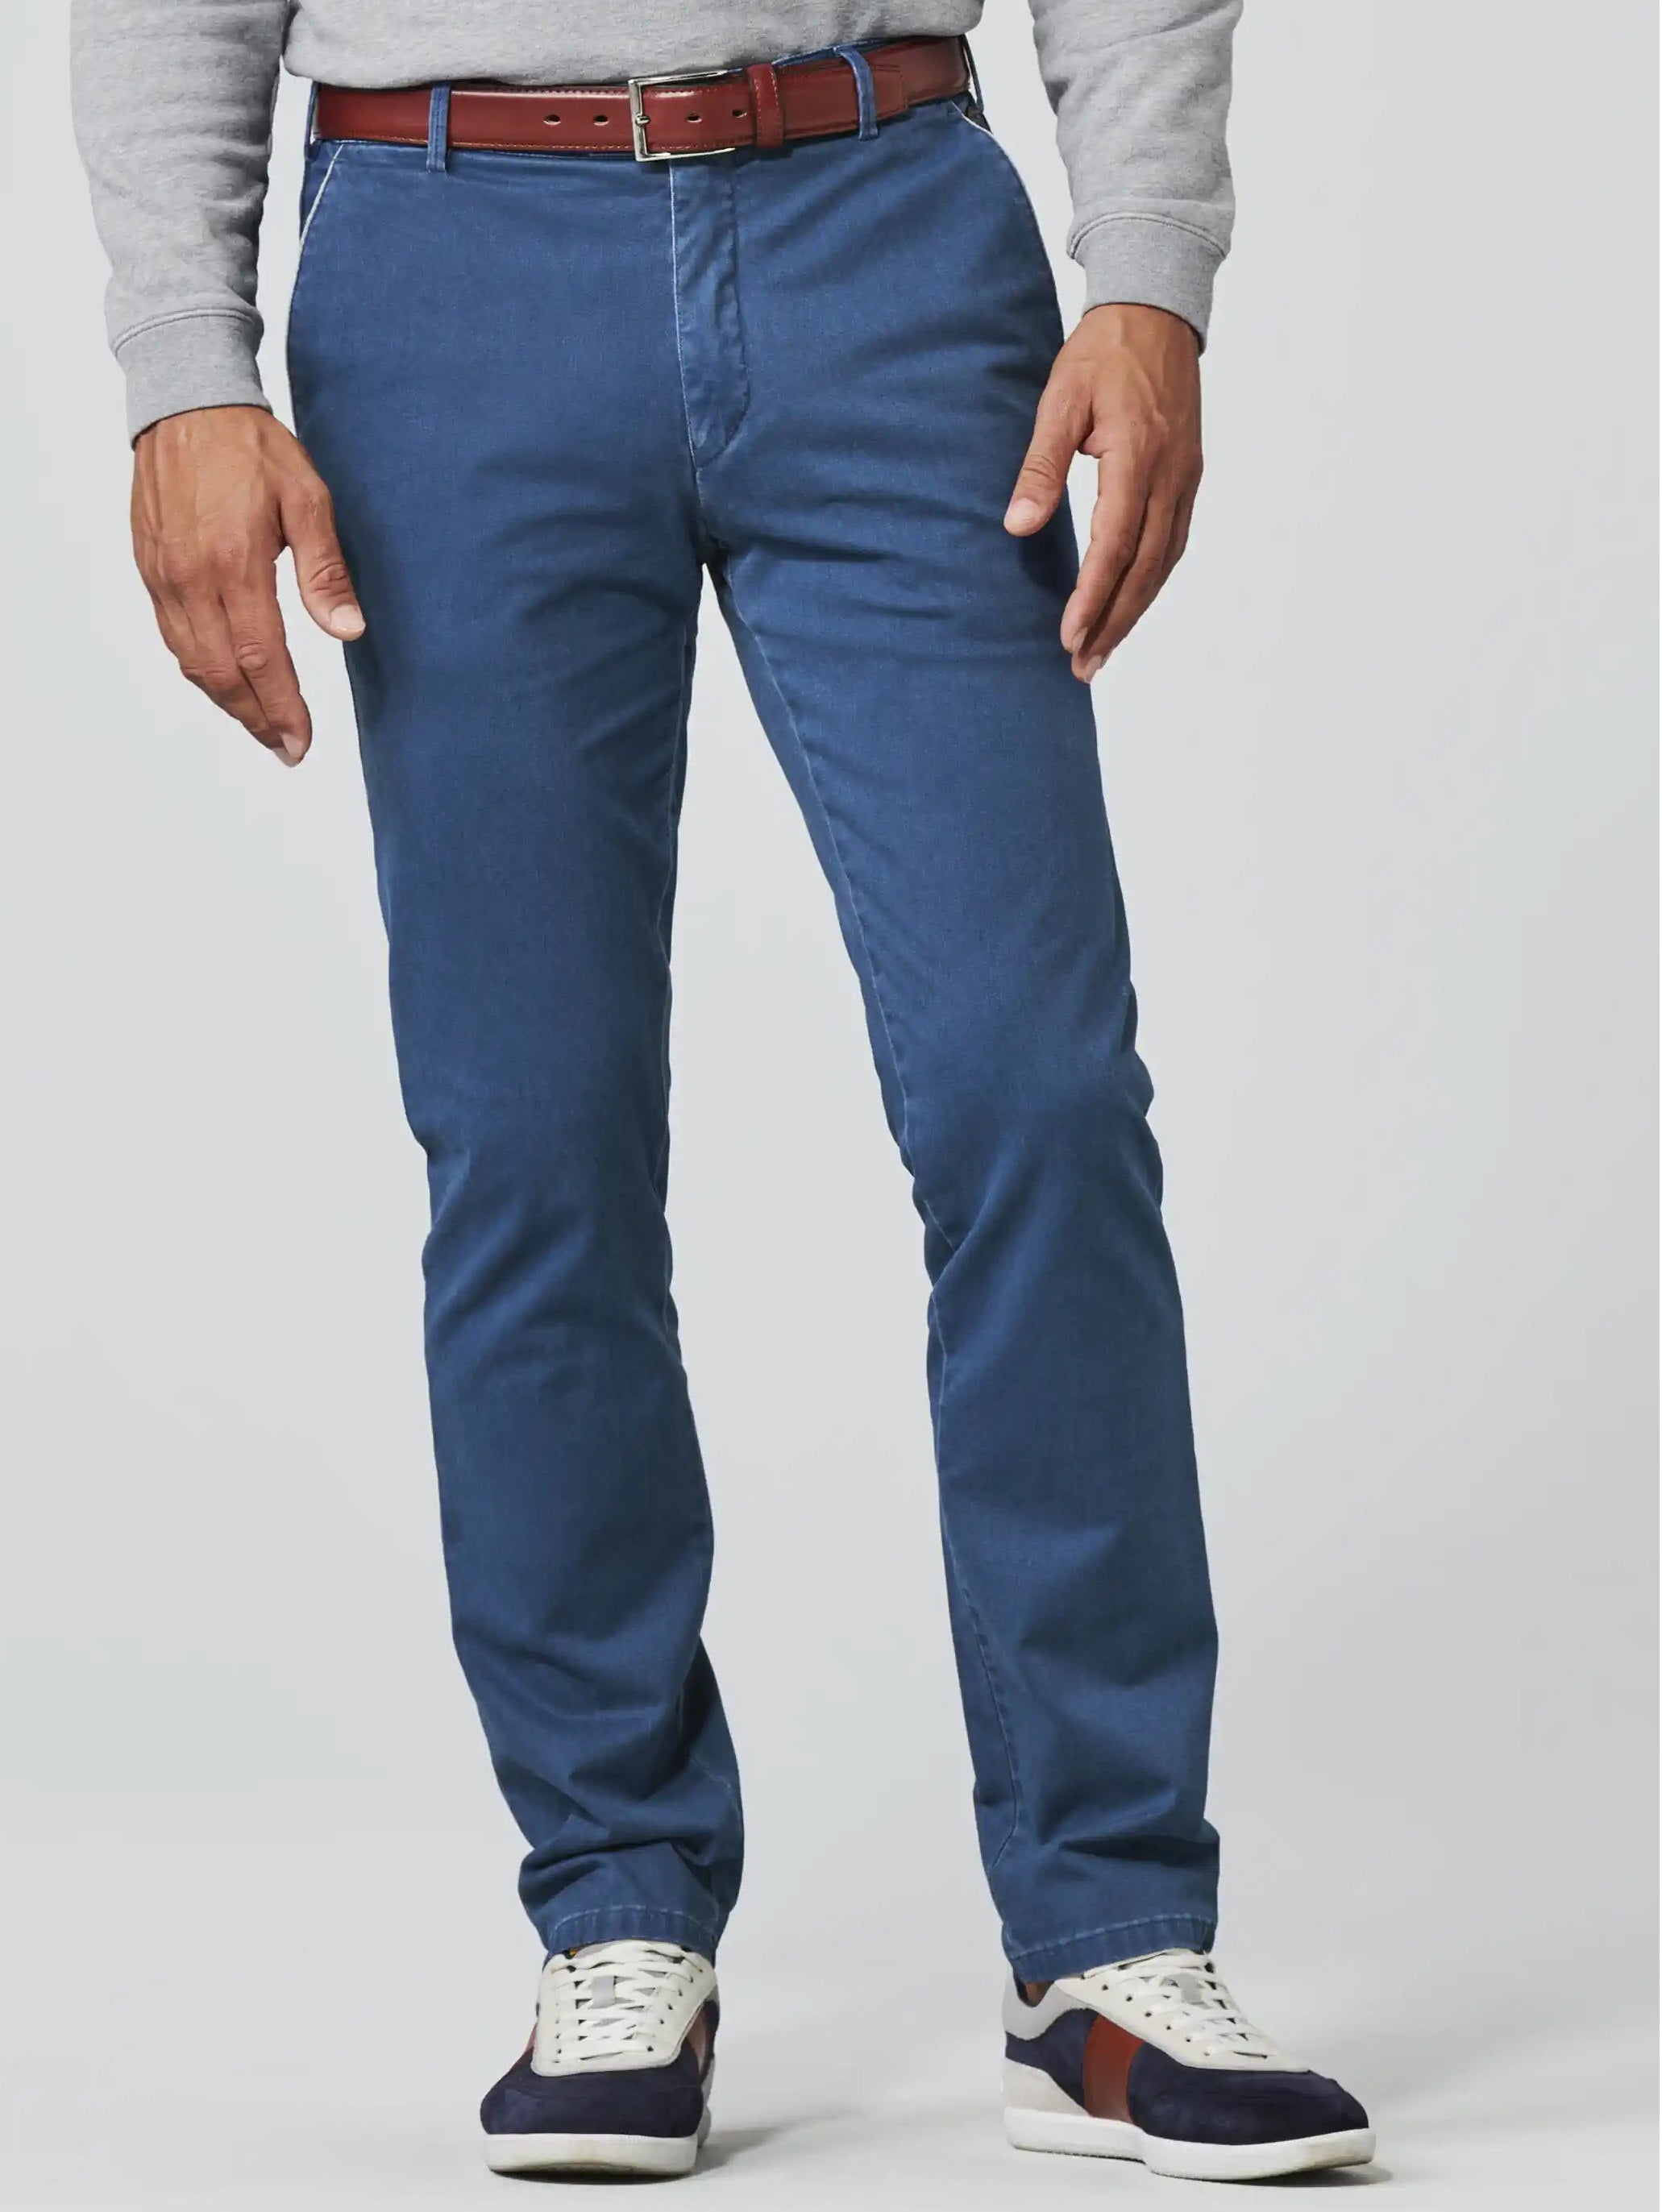 MEYER Trousers - New York 5000 Soft Twill Summer Chino - Blue